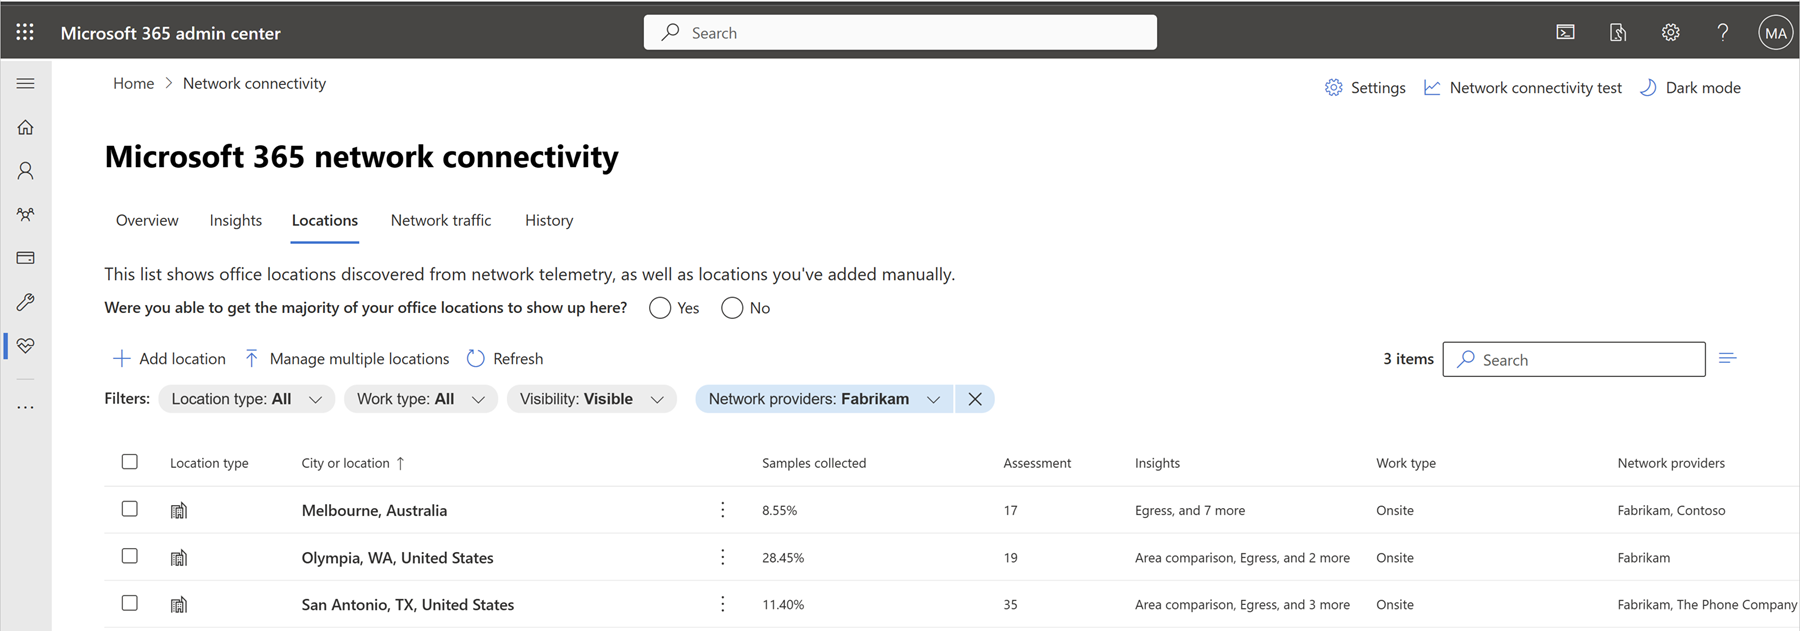 Screenshot of the network providers by location page in the admin center.